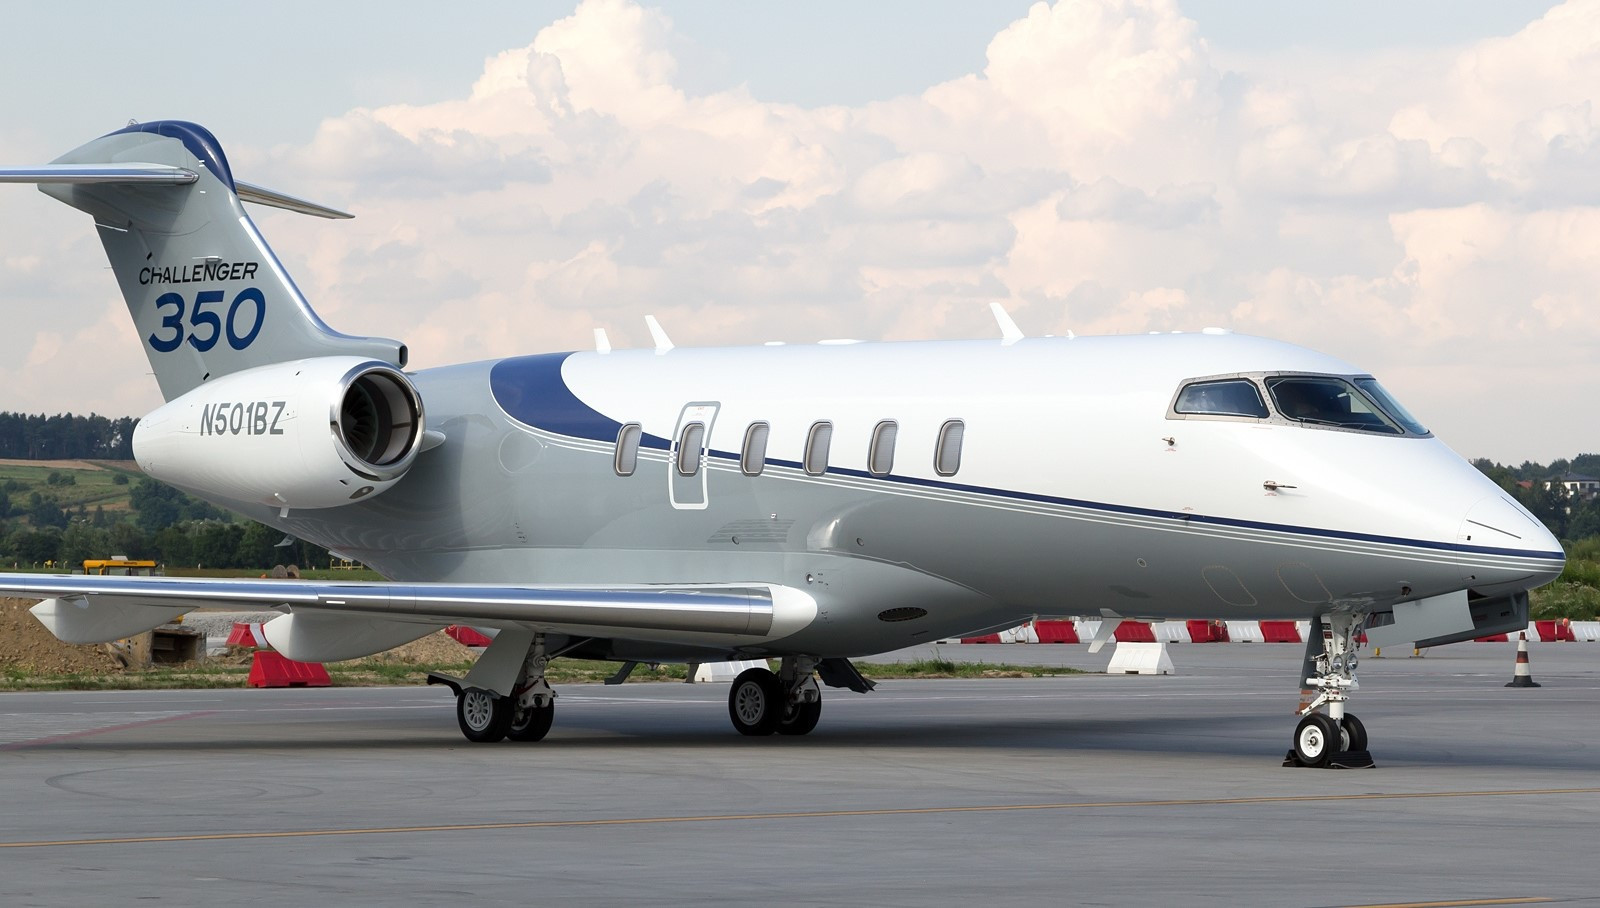 bombardier challenger 350 aircraft image.jpg